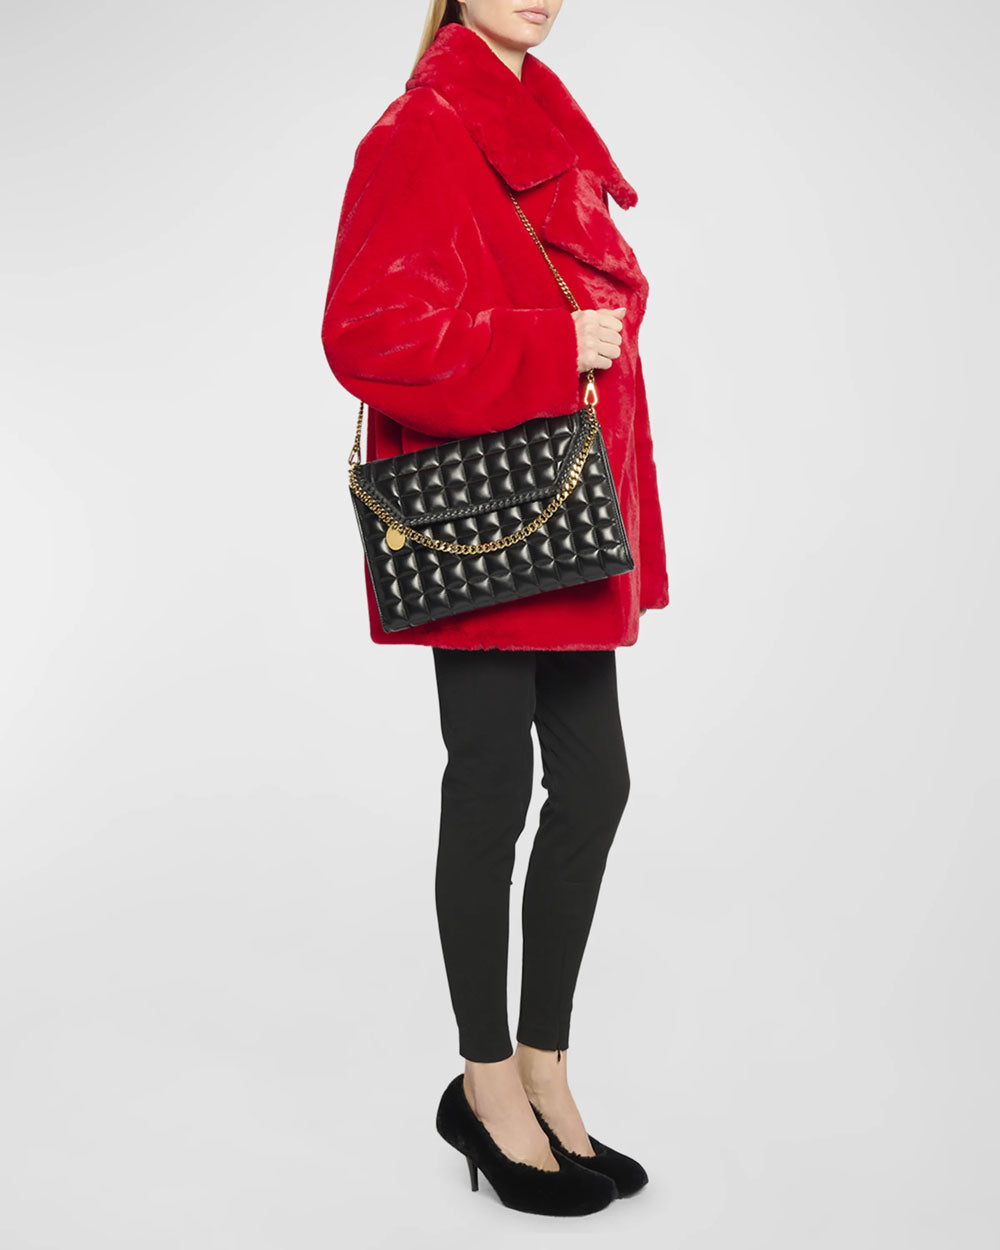 Small Rockstud Grainy Calfskin Crossbody Bag for Woman in Rouge Pur